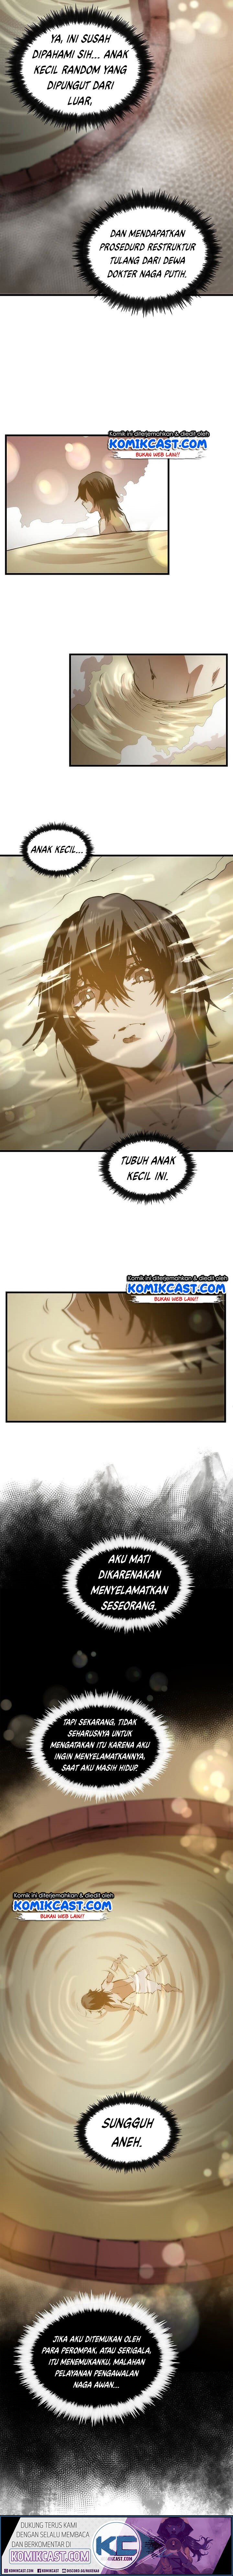 Doctor’s Rebirth Chapter 05